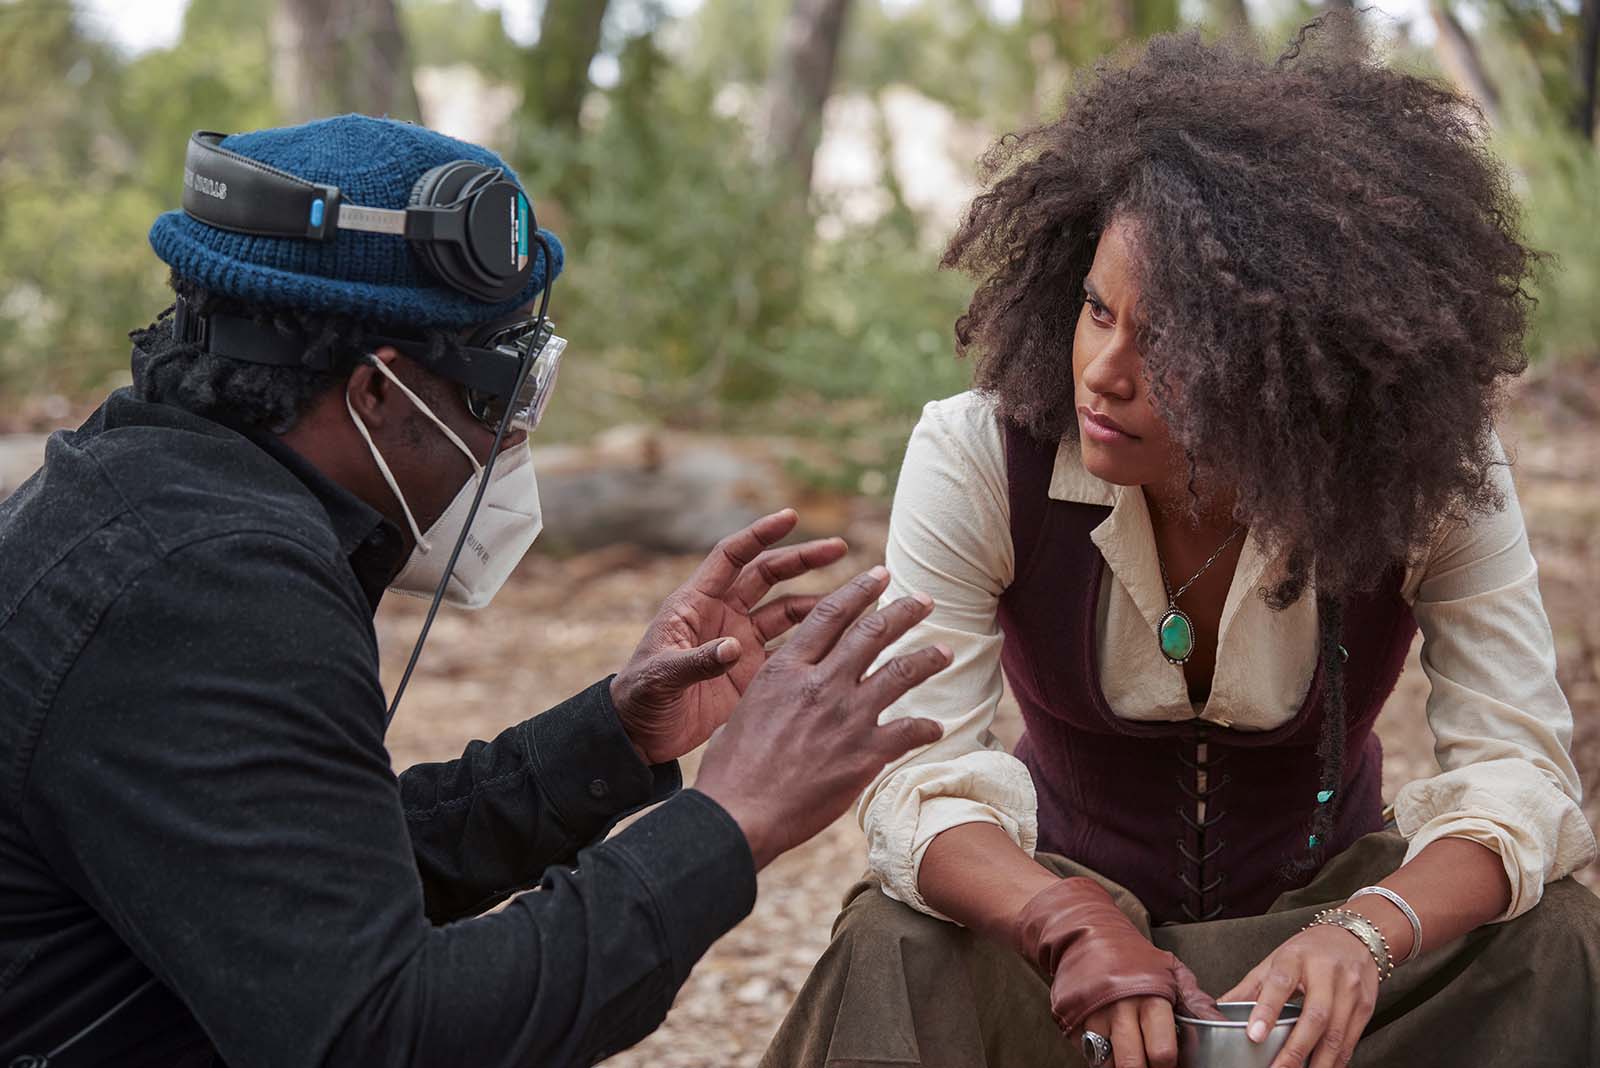 Writer/director Jeymes Samuel on set with Zazie Beetz, who plays Stagecoach Mary in The Harder They Fall. Image © Netflix